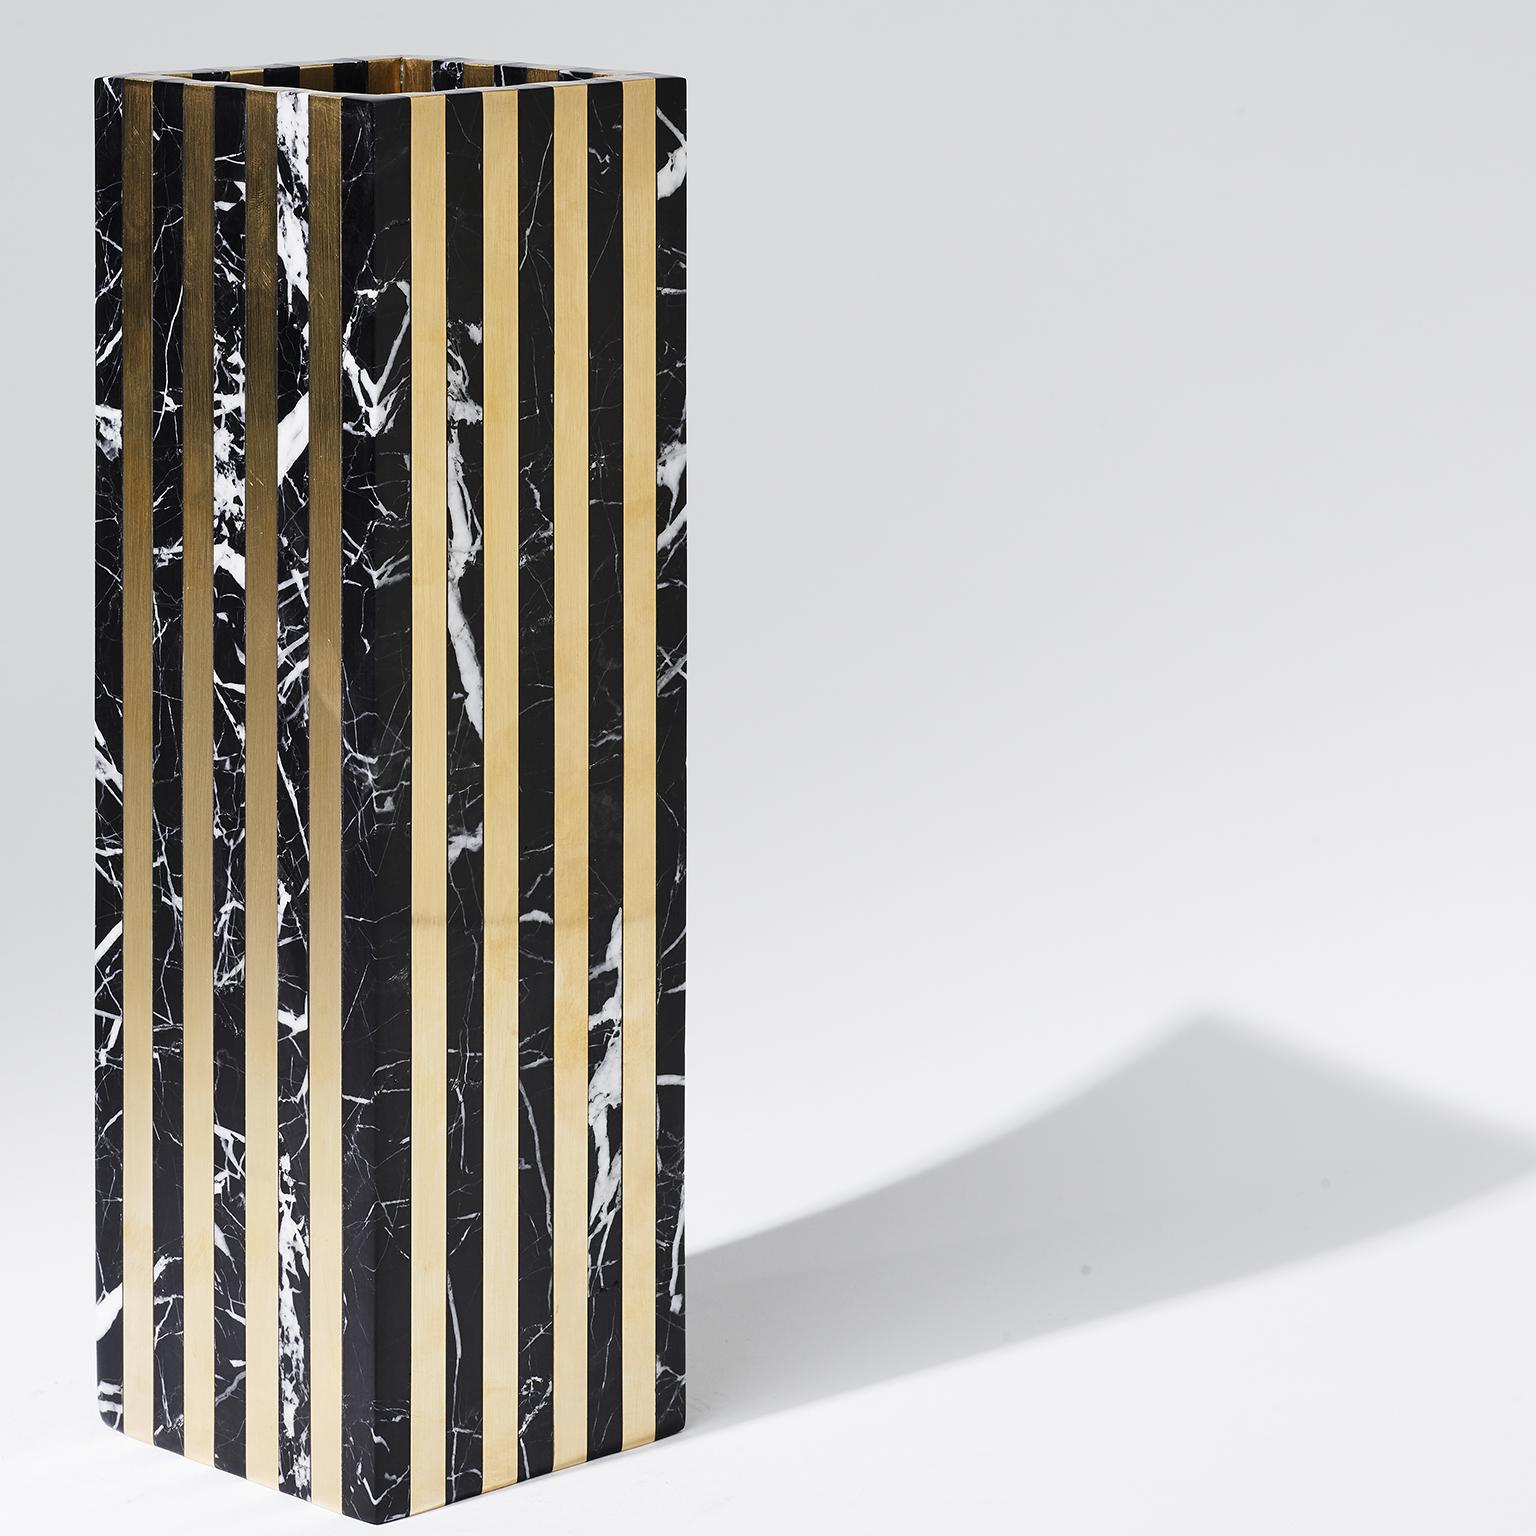 A marvel of stone craftsmanship, this solid brass and marble vase is the pièce-de-résistance of Greg Natale's accessories collection. Dynasty presents us an imposing series of brass and richly veined Nero Marble pillars sitting immaculately